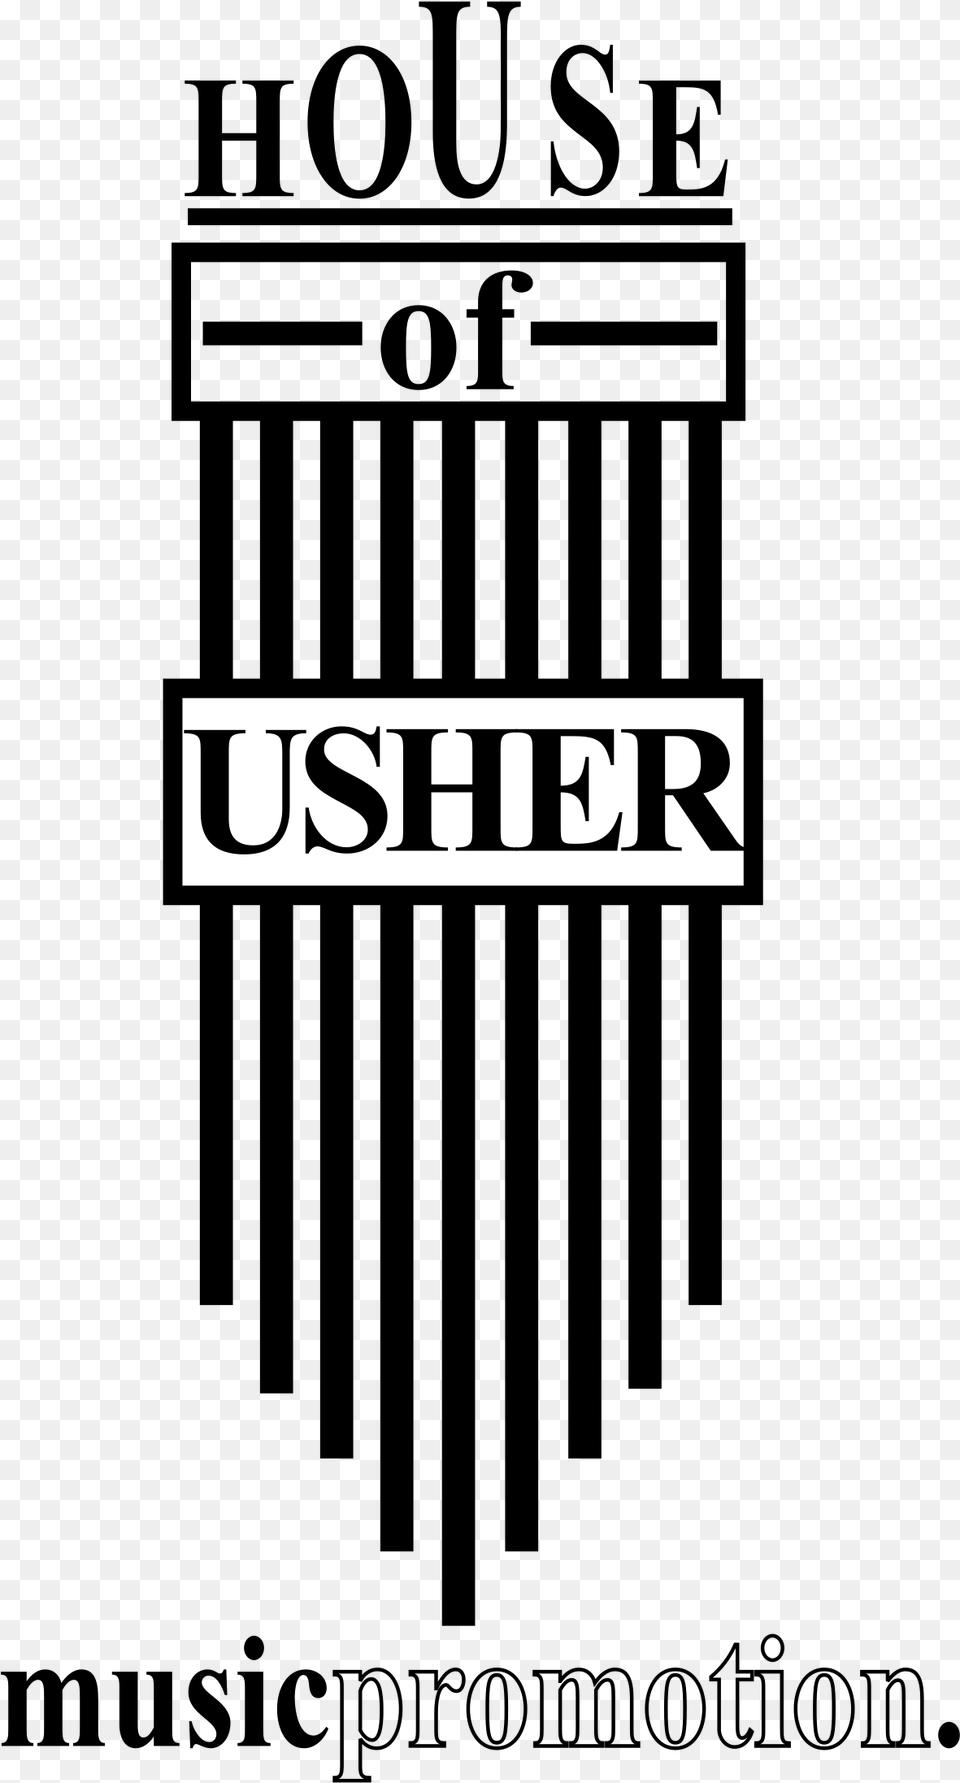 House Of Usher Music Promotion Logo Poster, Text Free Transparent Png